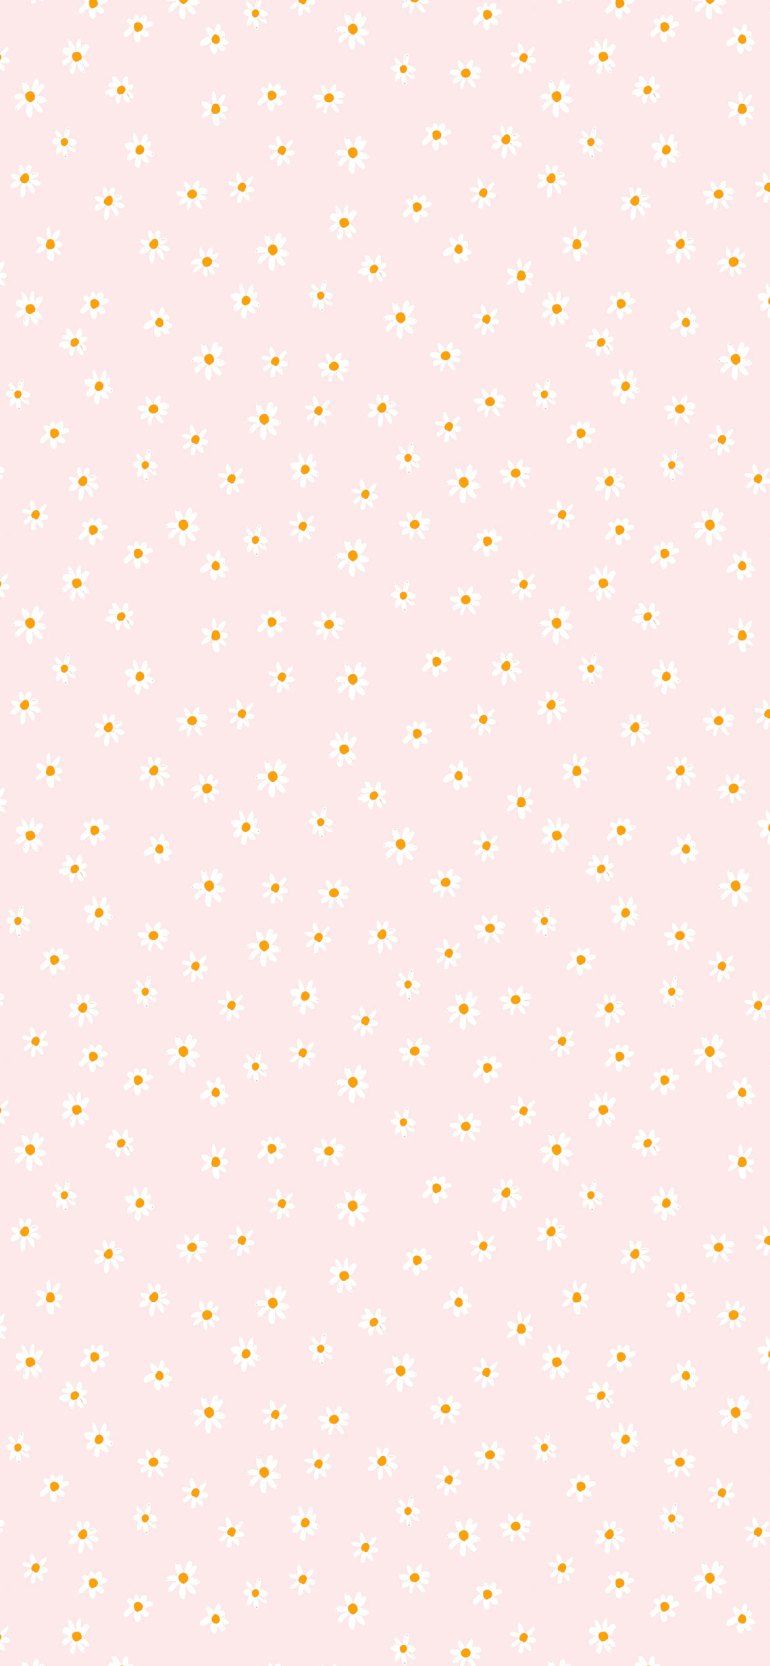 Pink Aesthetic Picture : Daisy Wallpaper for Phone Wallpaper